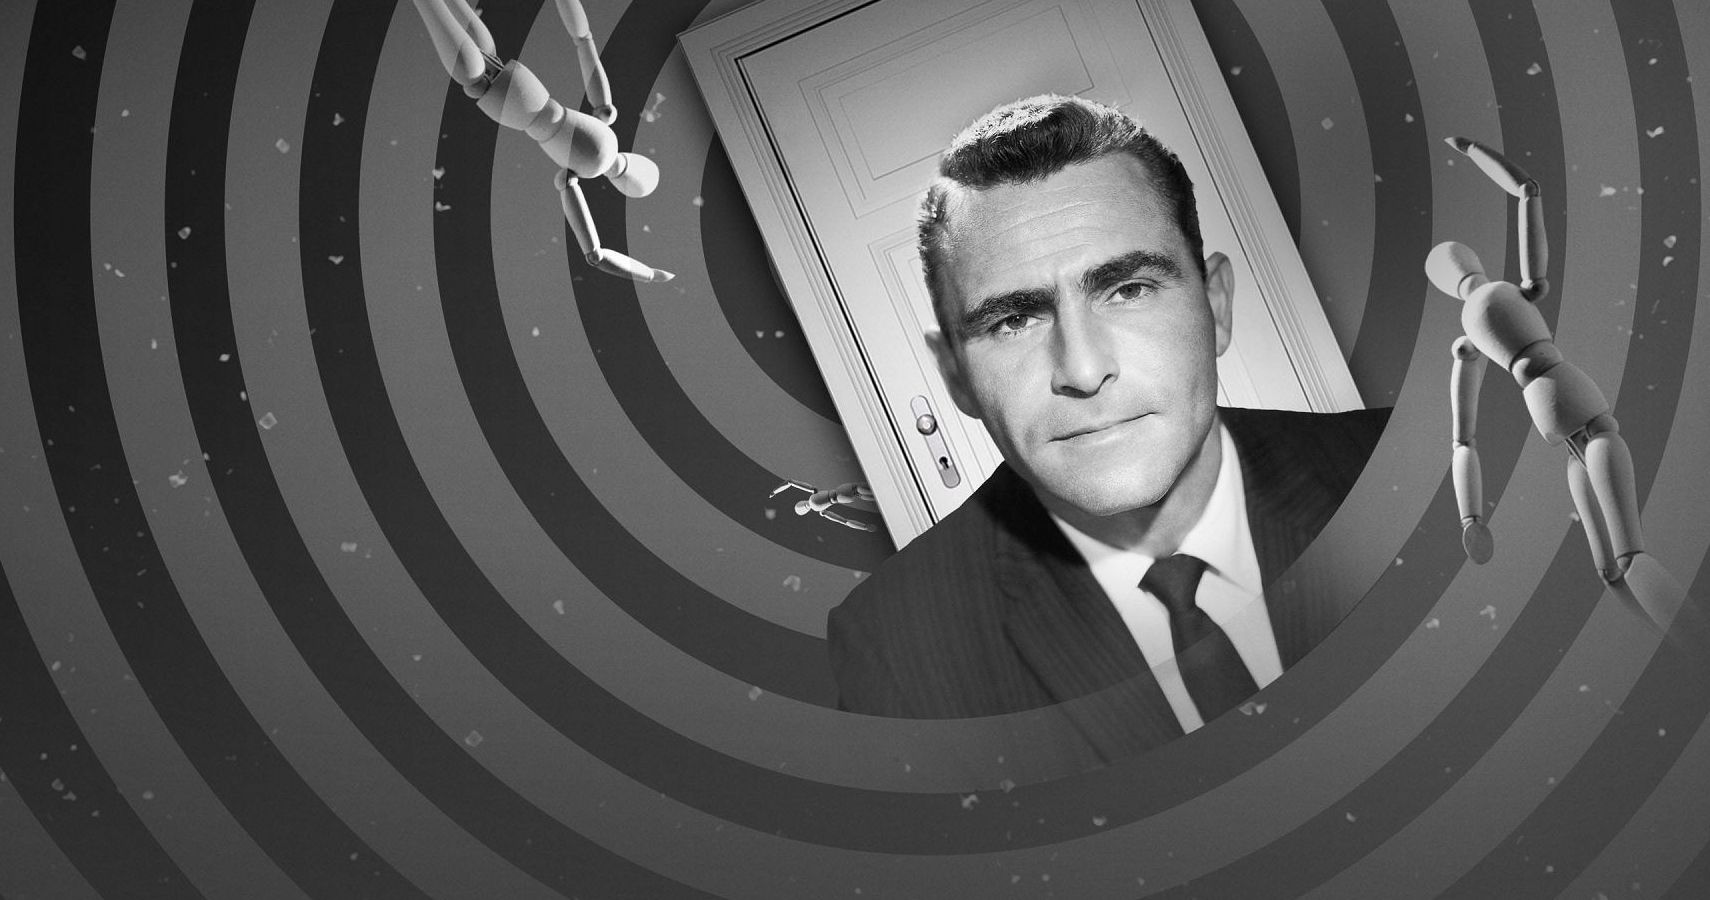 10 Shows To Watch If You Like The Twilight Zone